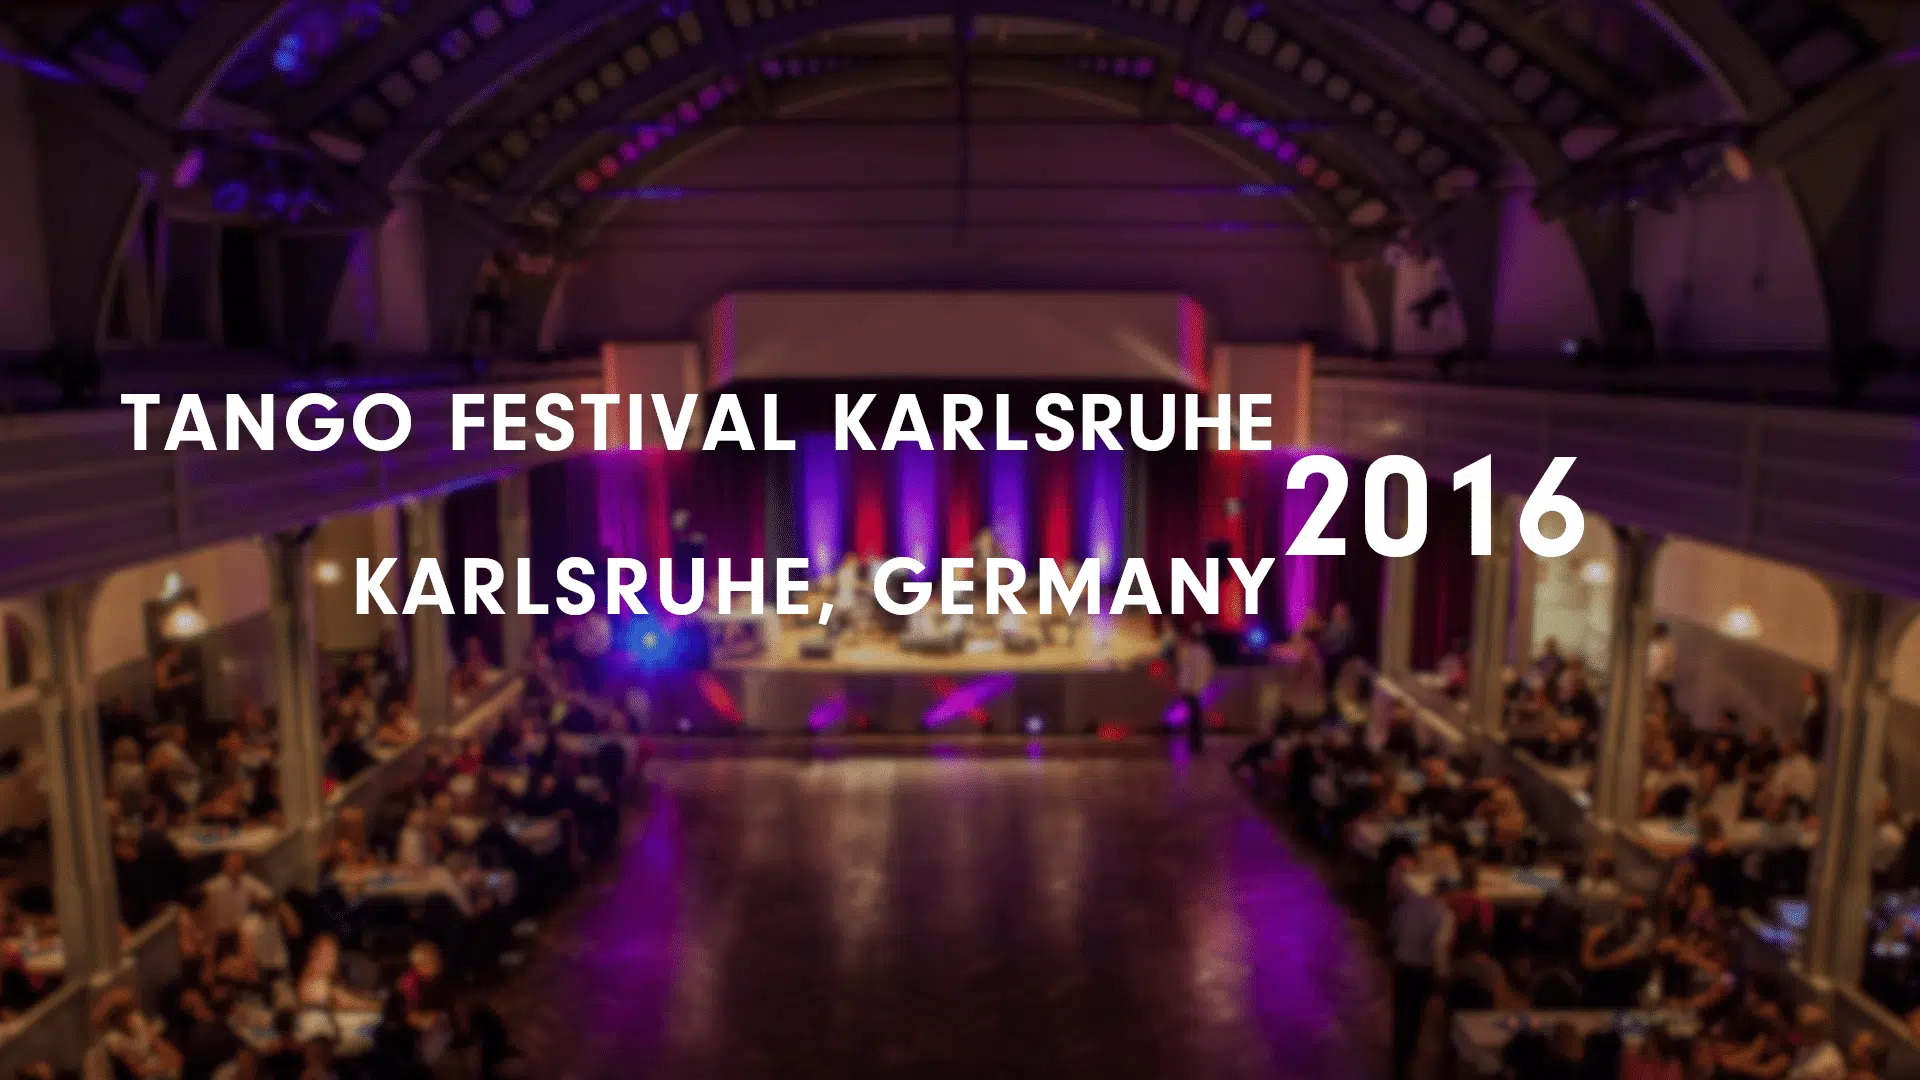 Tango Festival Karlsruhe 2016 preview picture